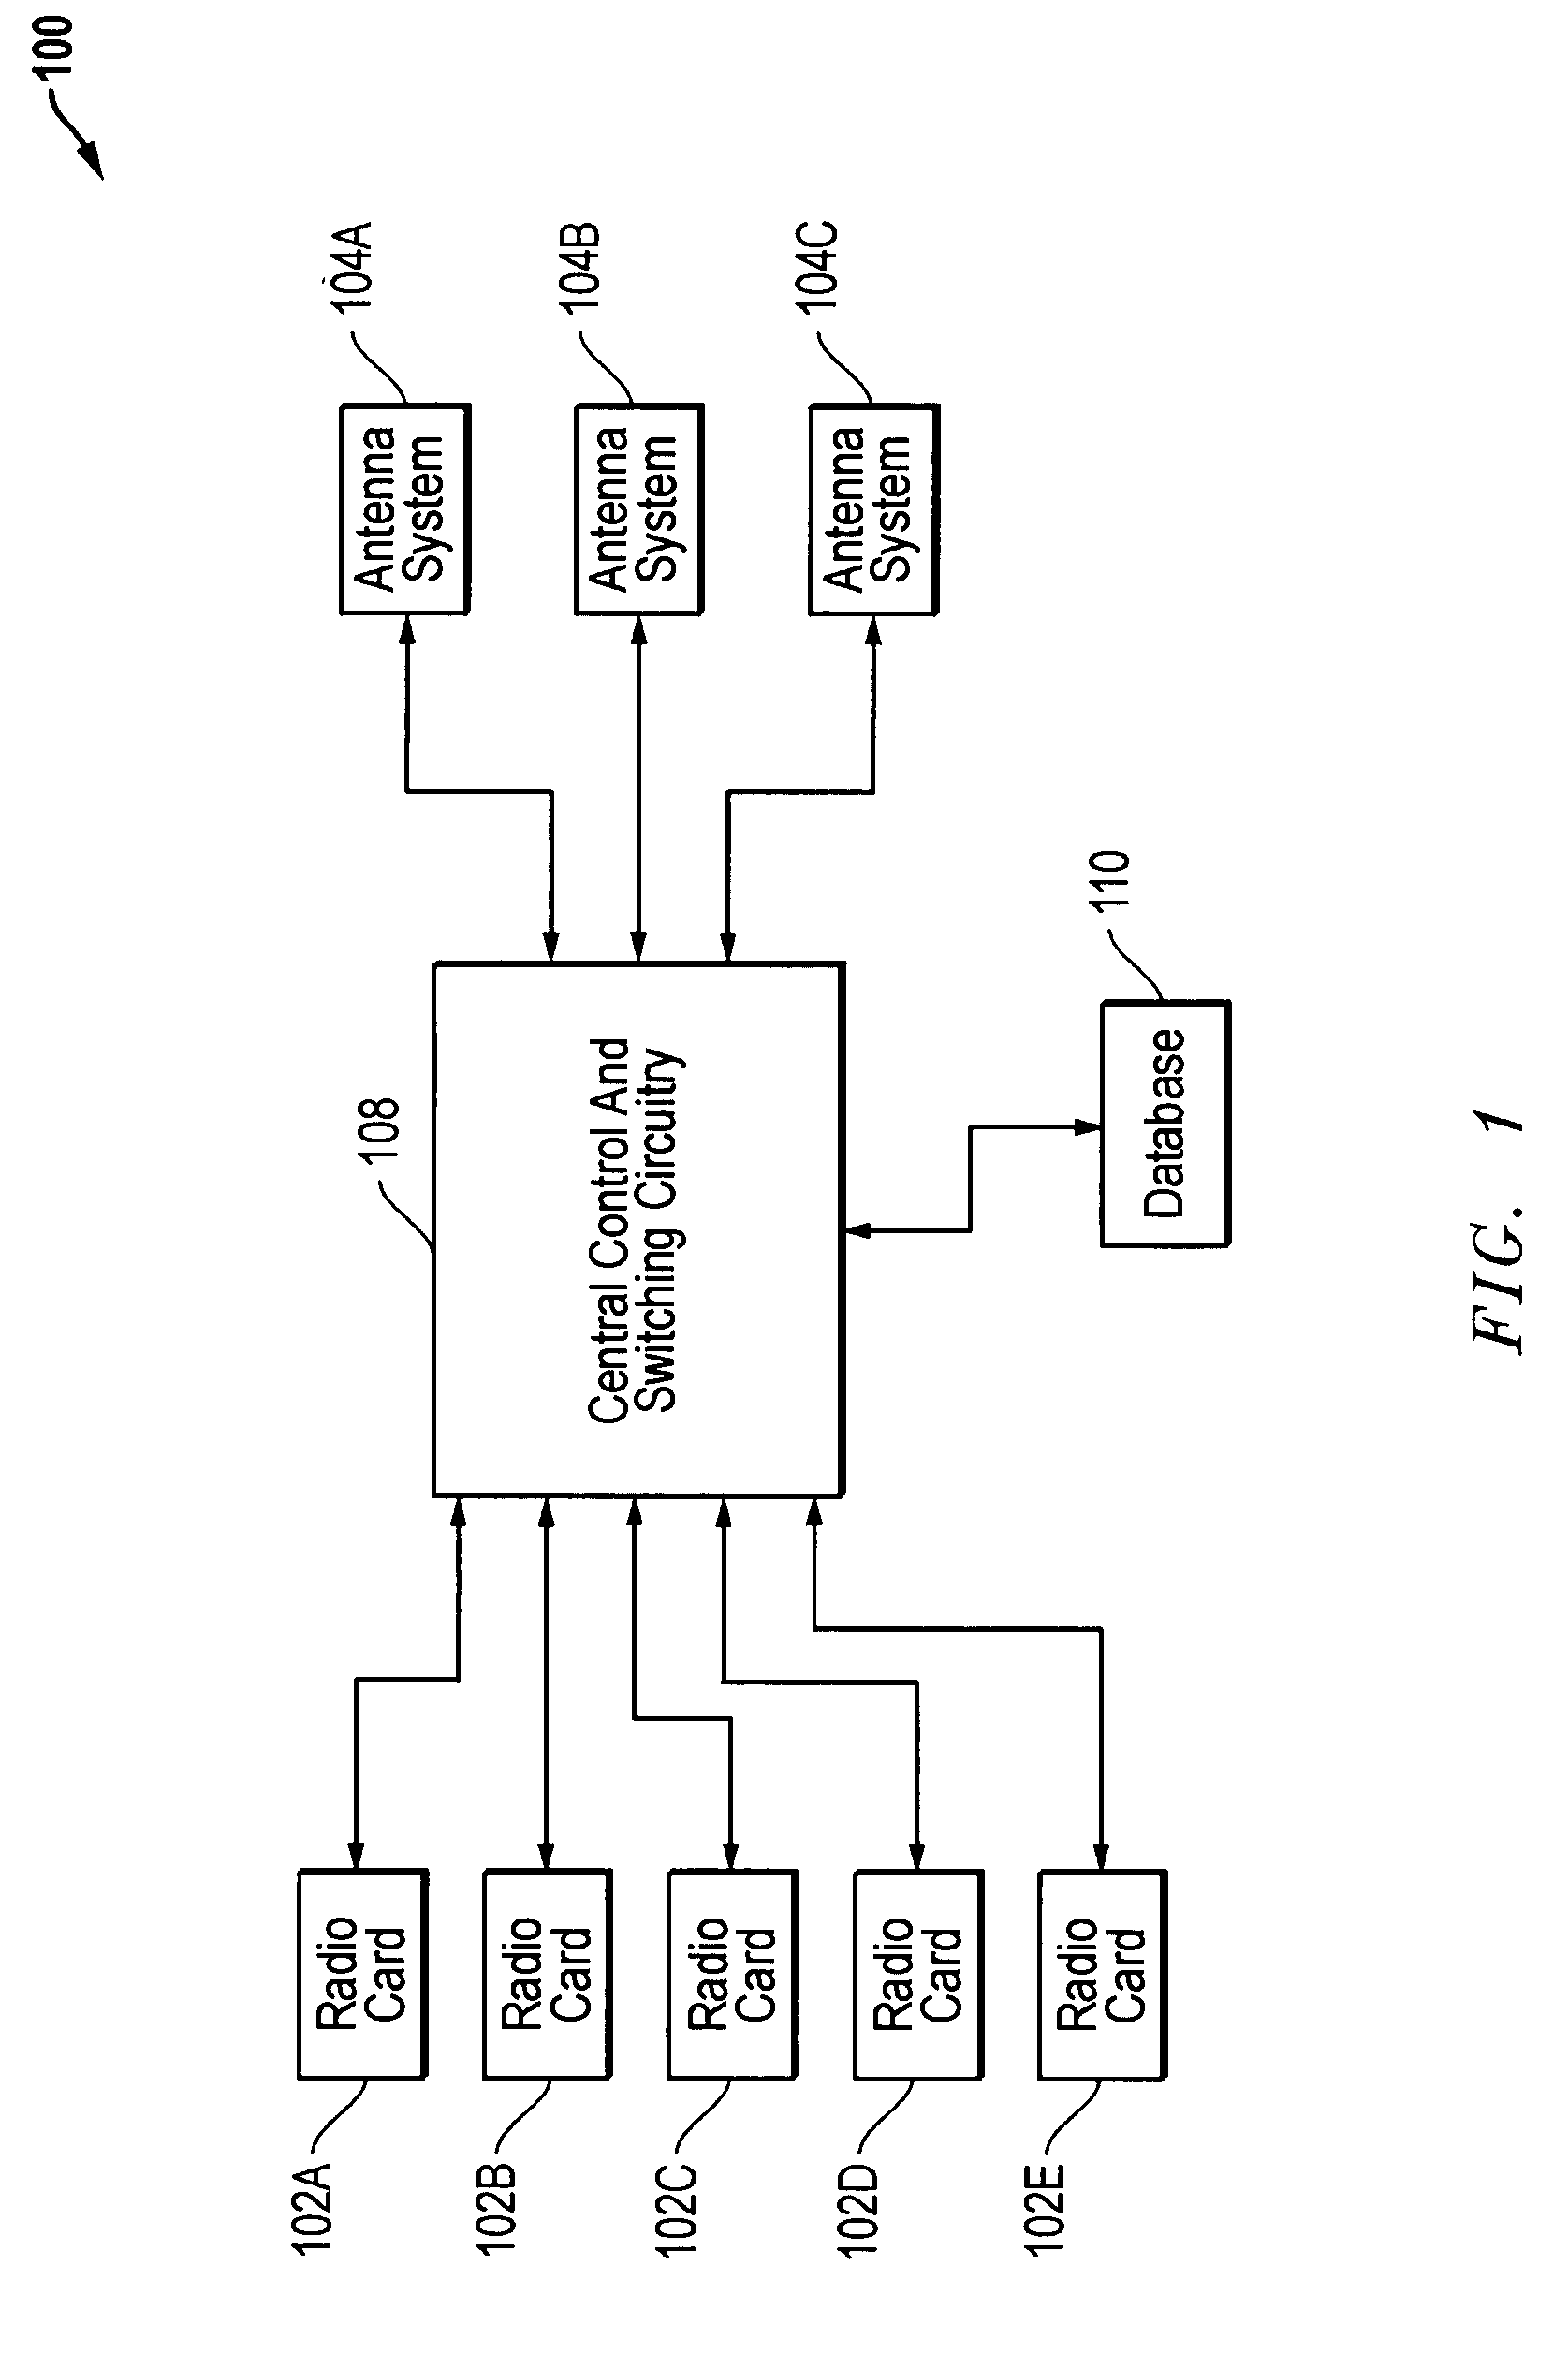 Database for antenna system matching for wireless communications in portable information handling systems